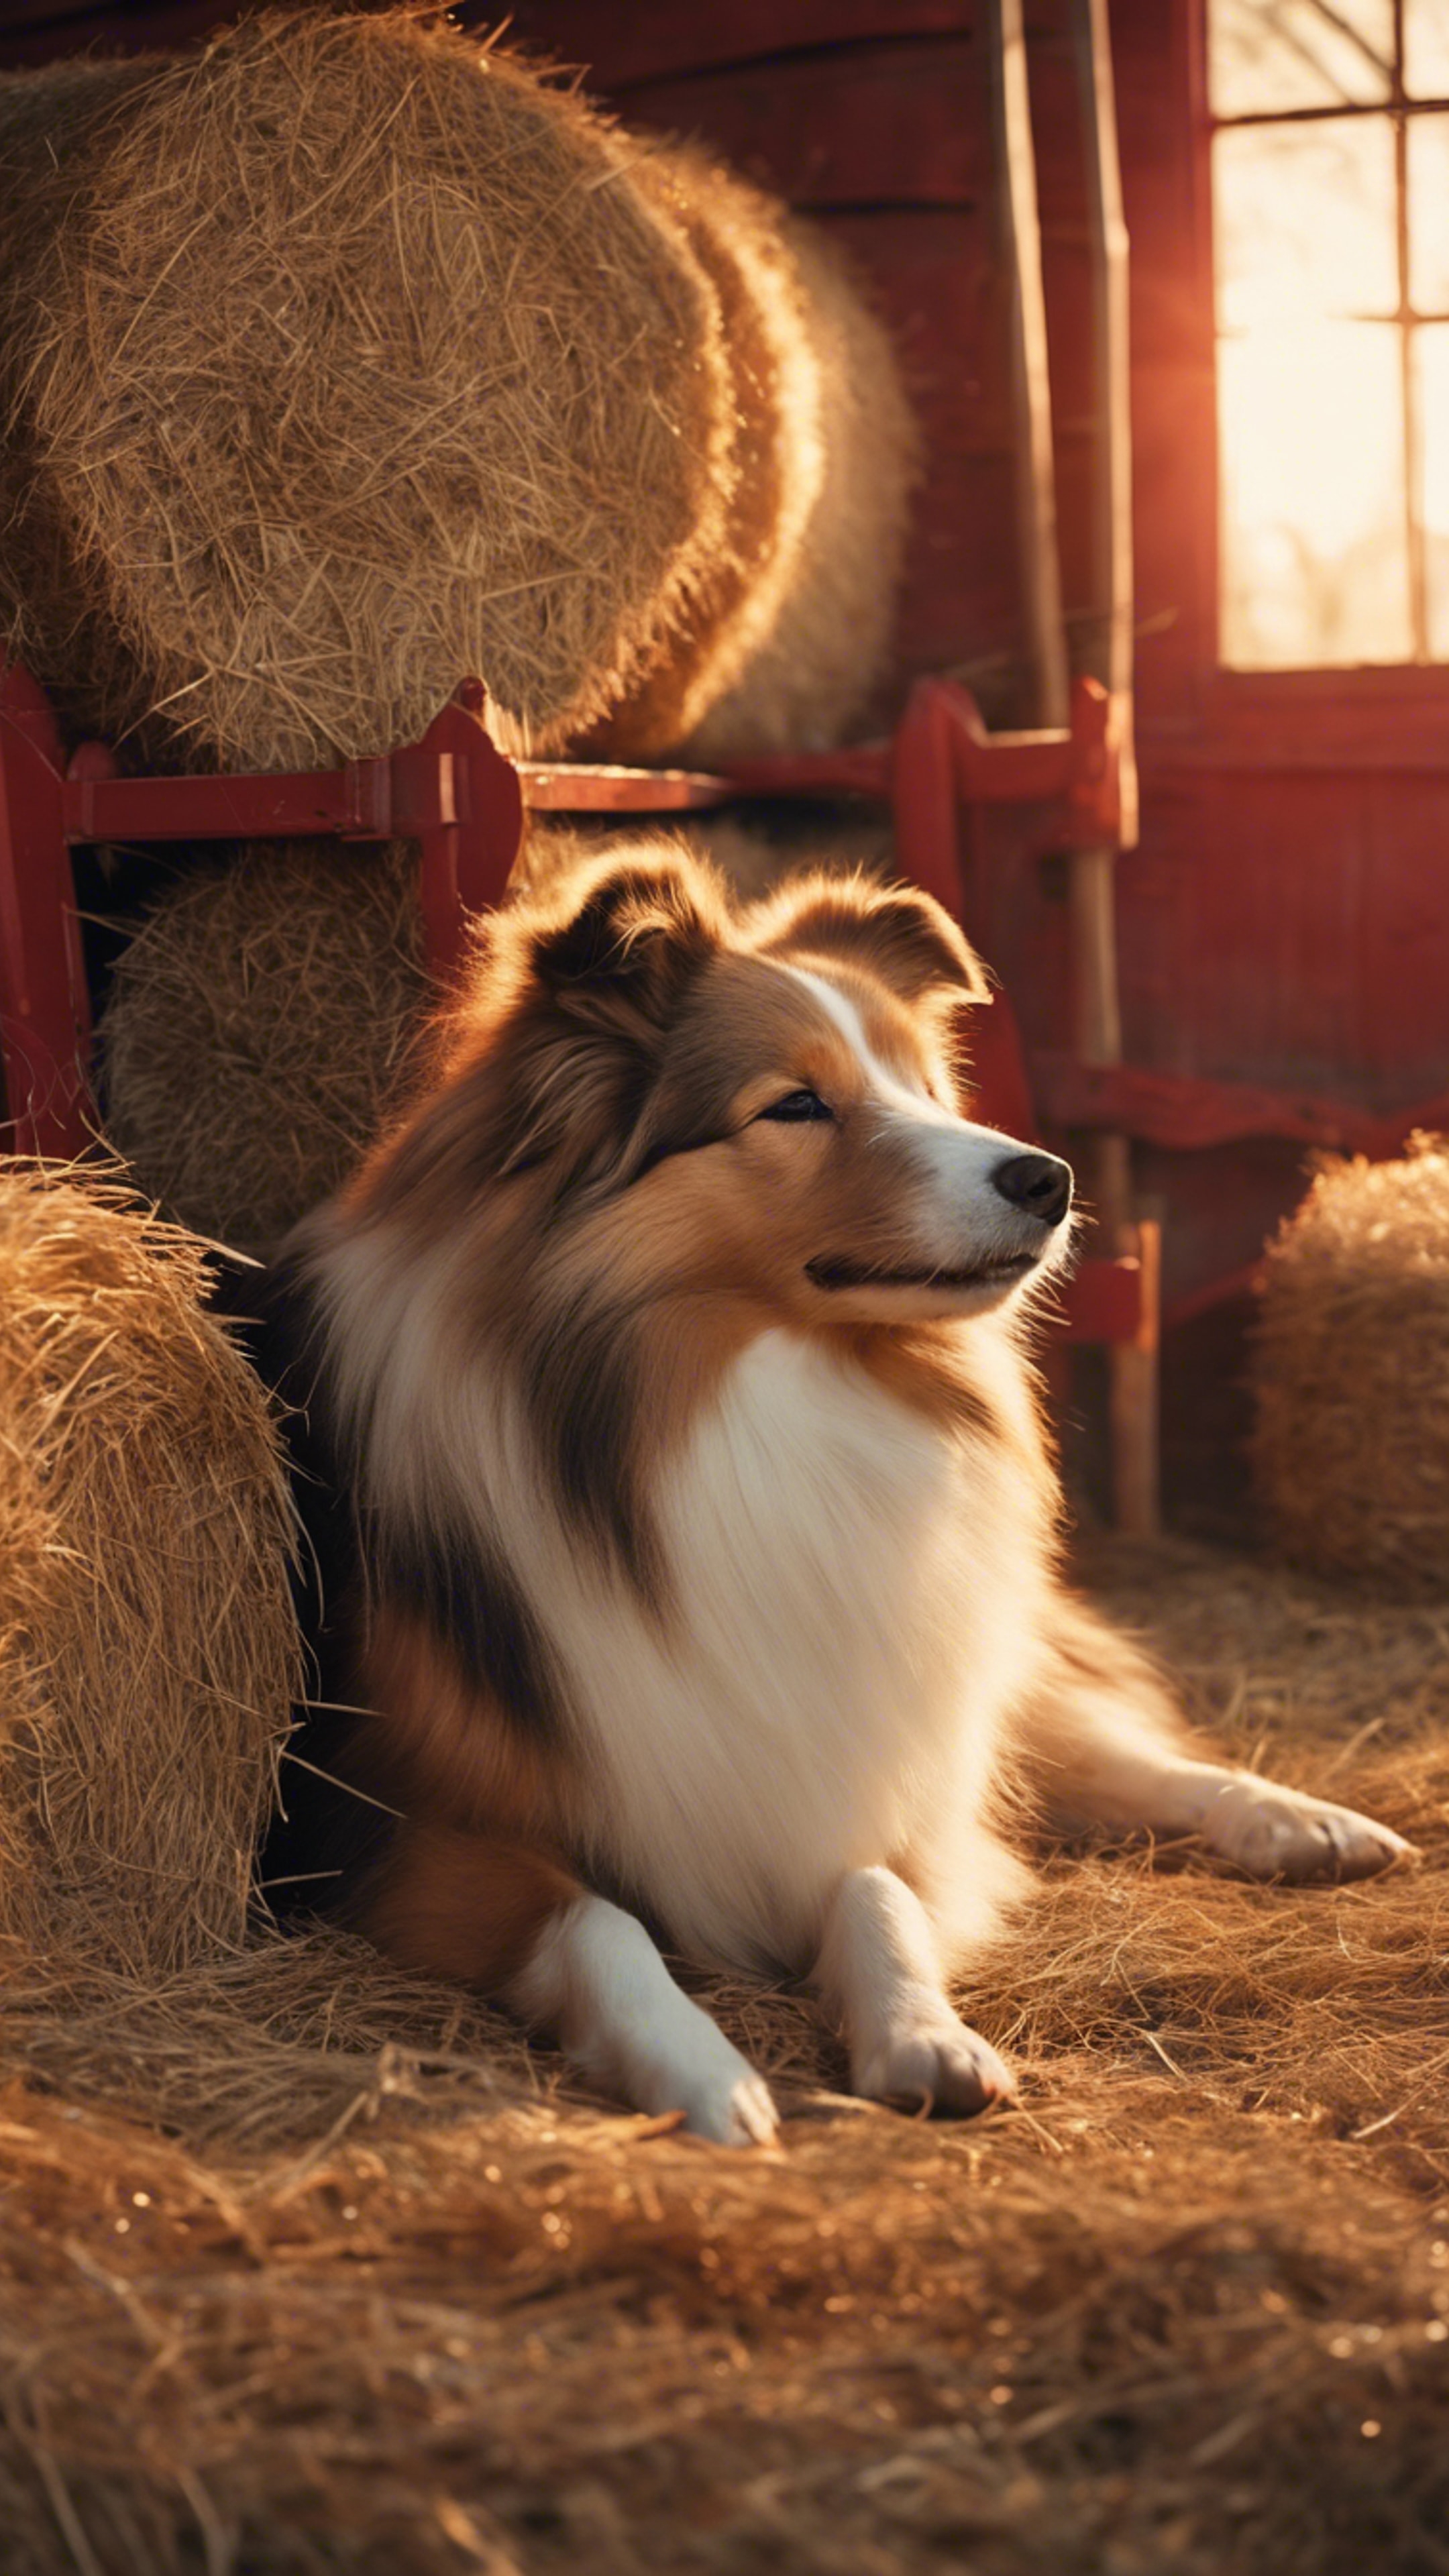 A Shetland Sheepdog sleeping in a vintage red barn, surrounded by hay balls and a setting sun. Wallpaper[4b8e09167f2043c5830e]